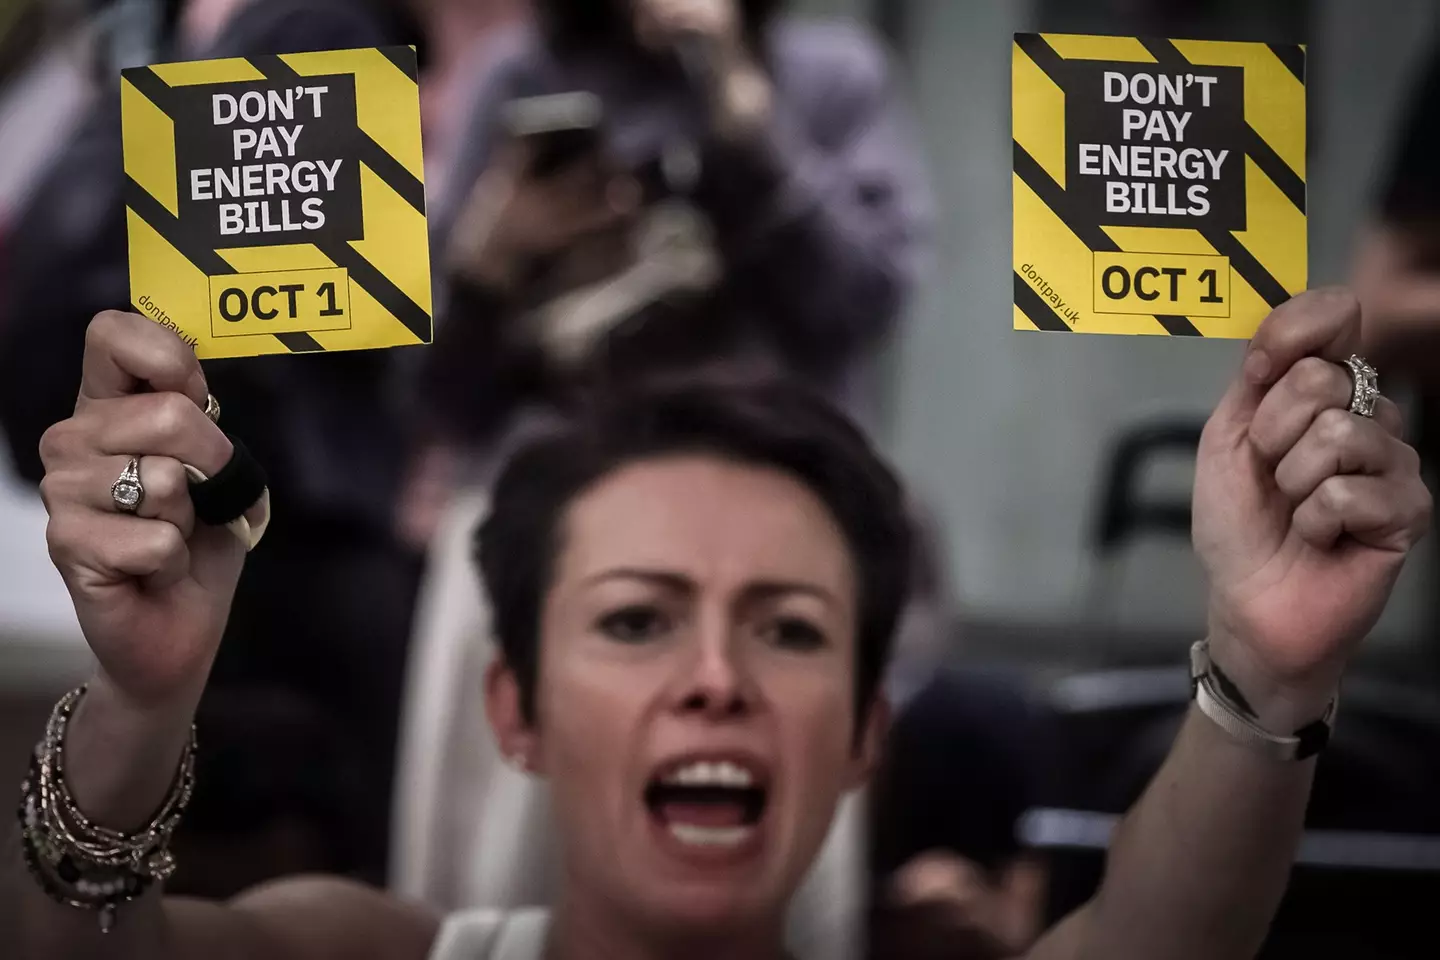 The plan was to not pay the energy bills on 1 October.